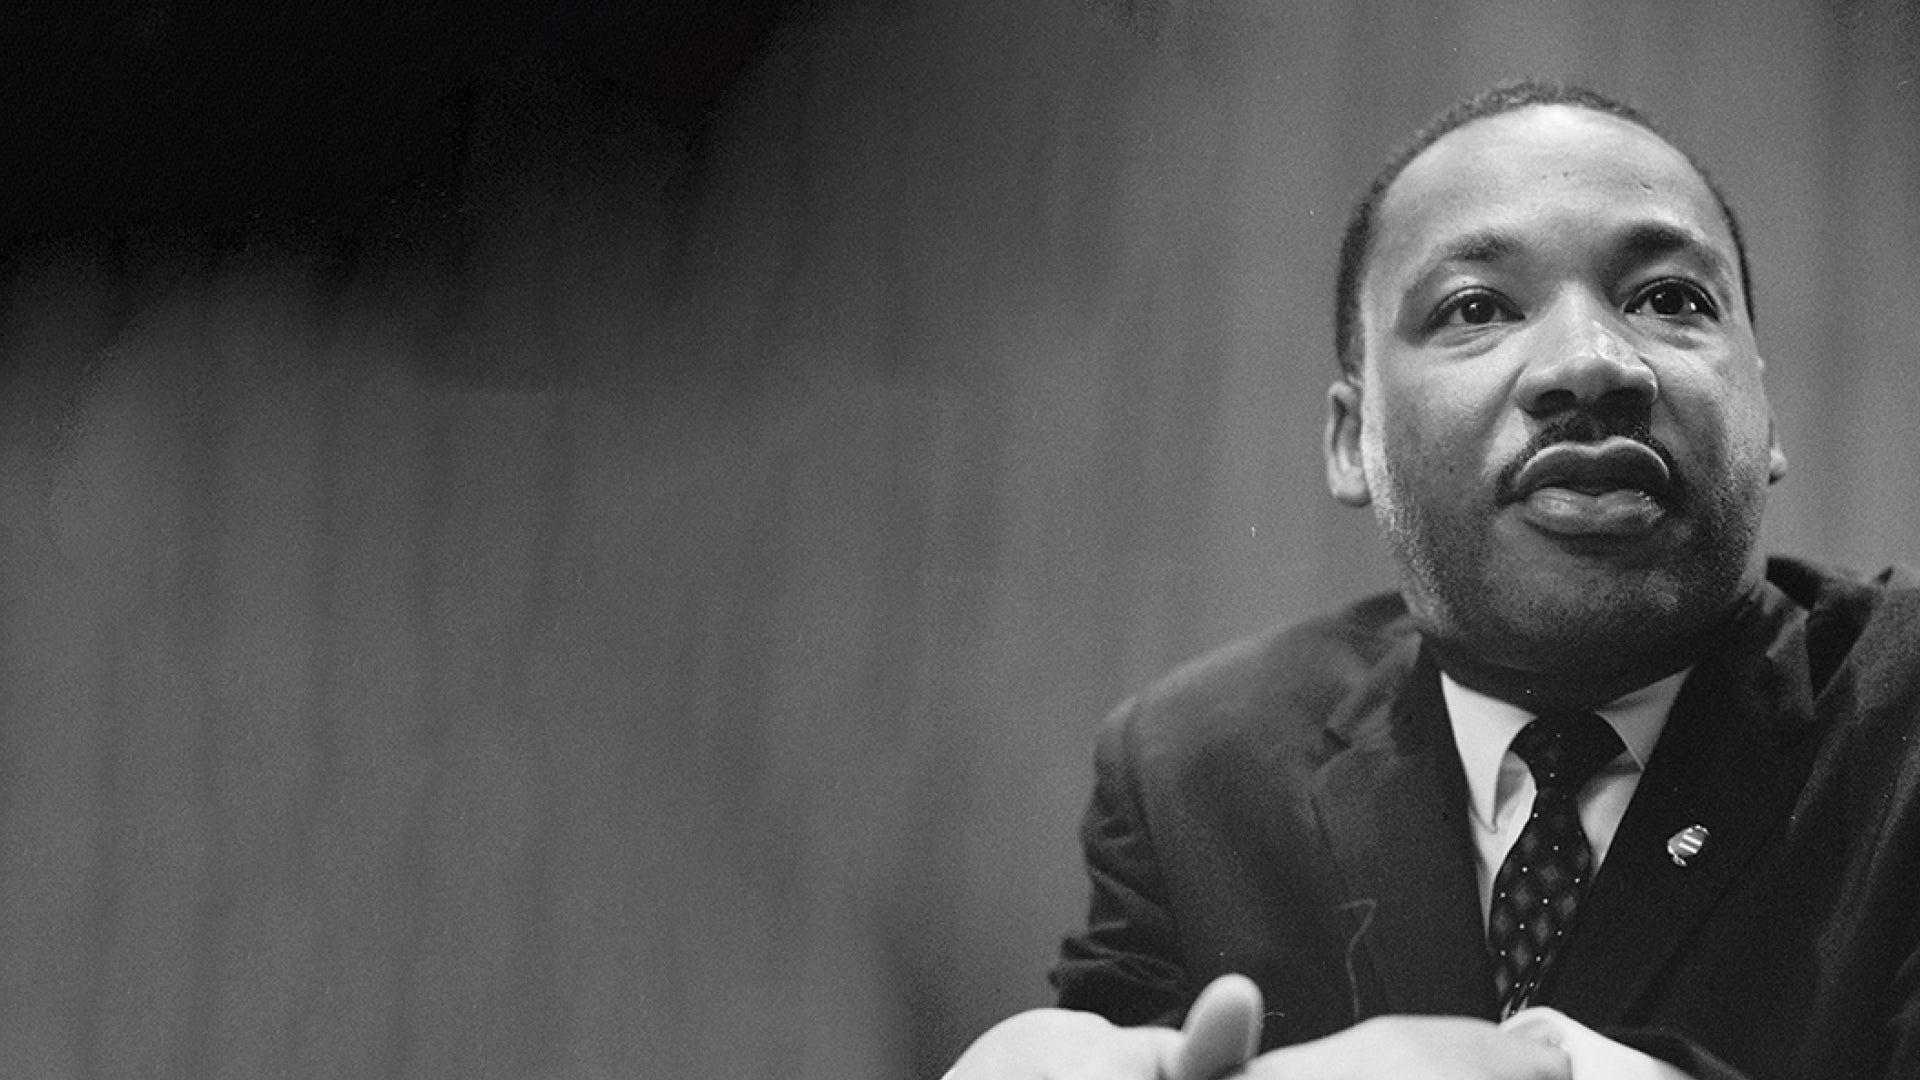 Dr. Martin Luther King, Jr. Tribute and Humanitarian Awards